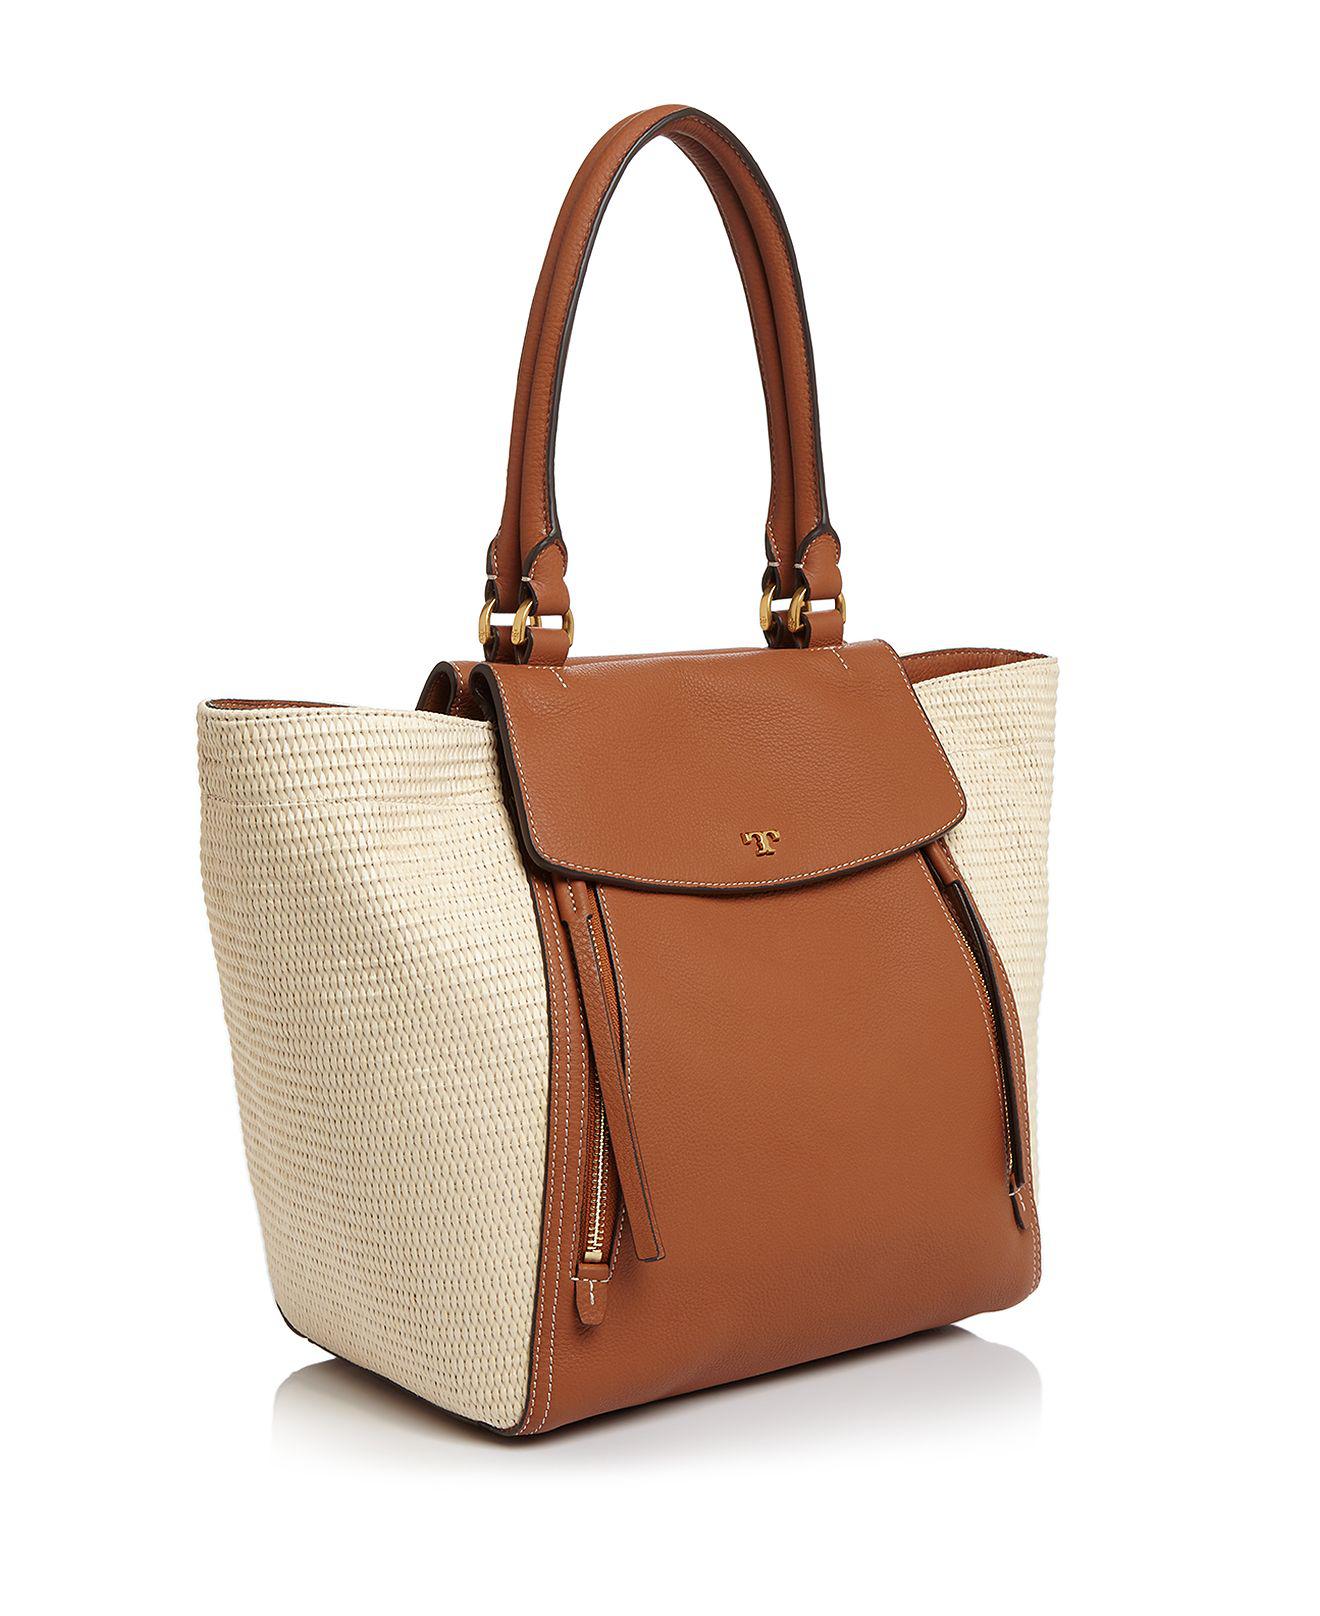 Tory Burch Half-moon Straw Tote | 926 | Totes in Brown | Lyst